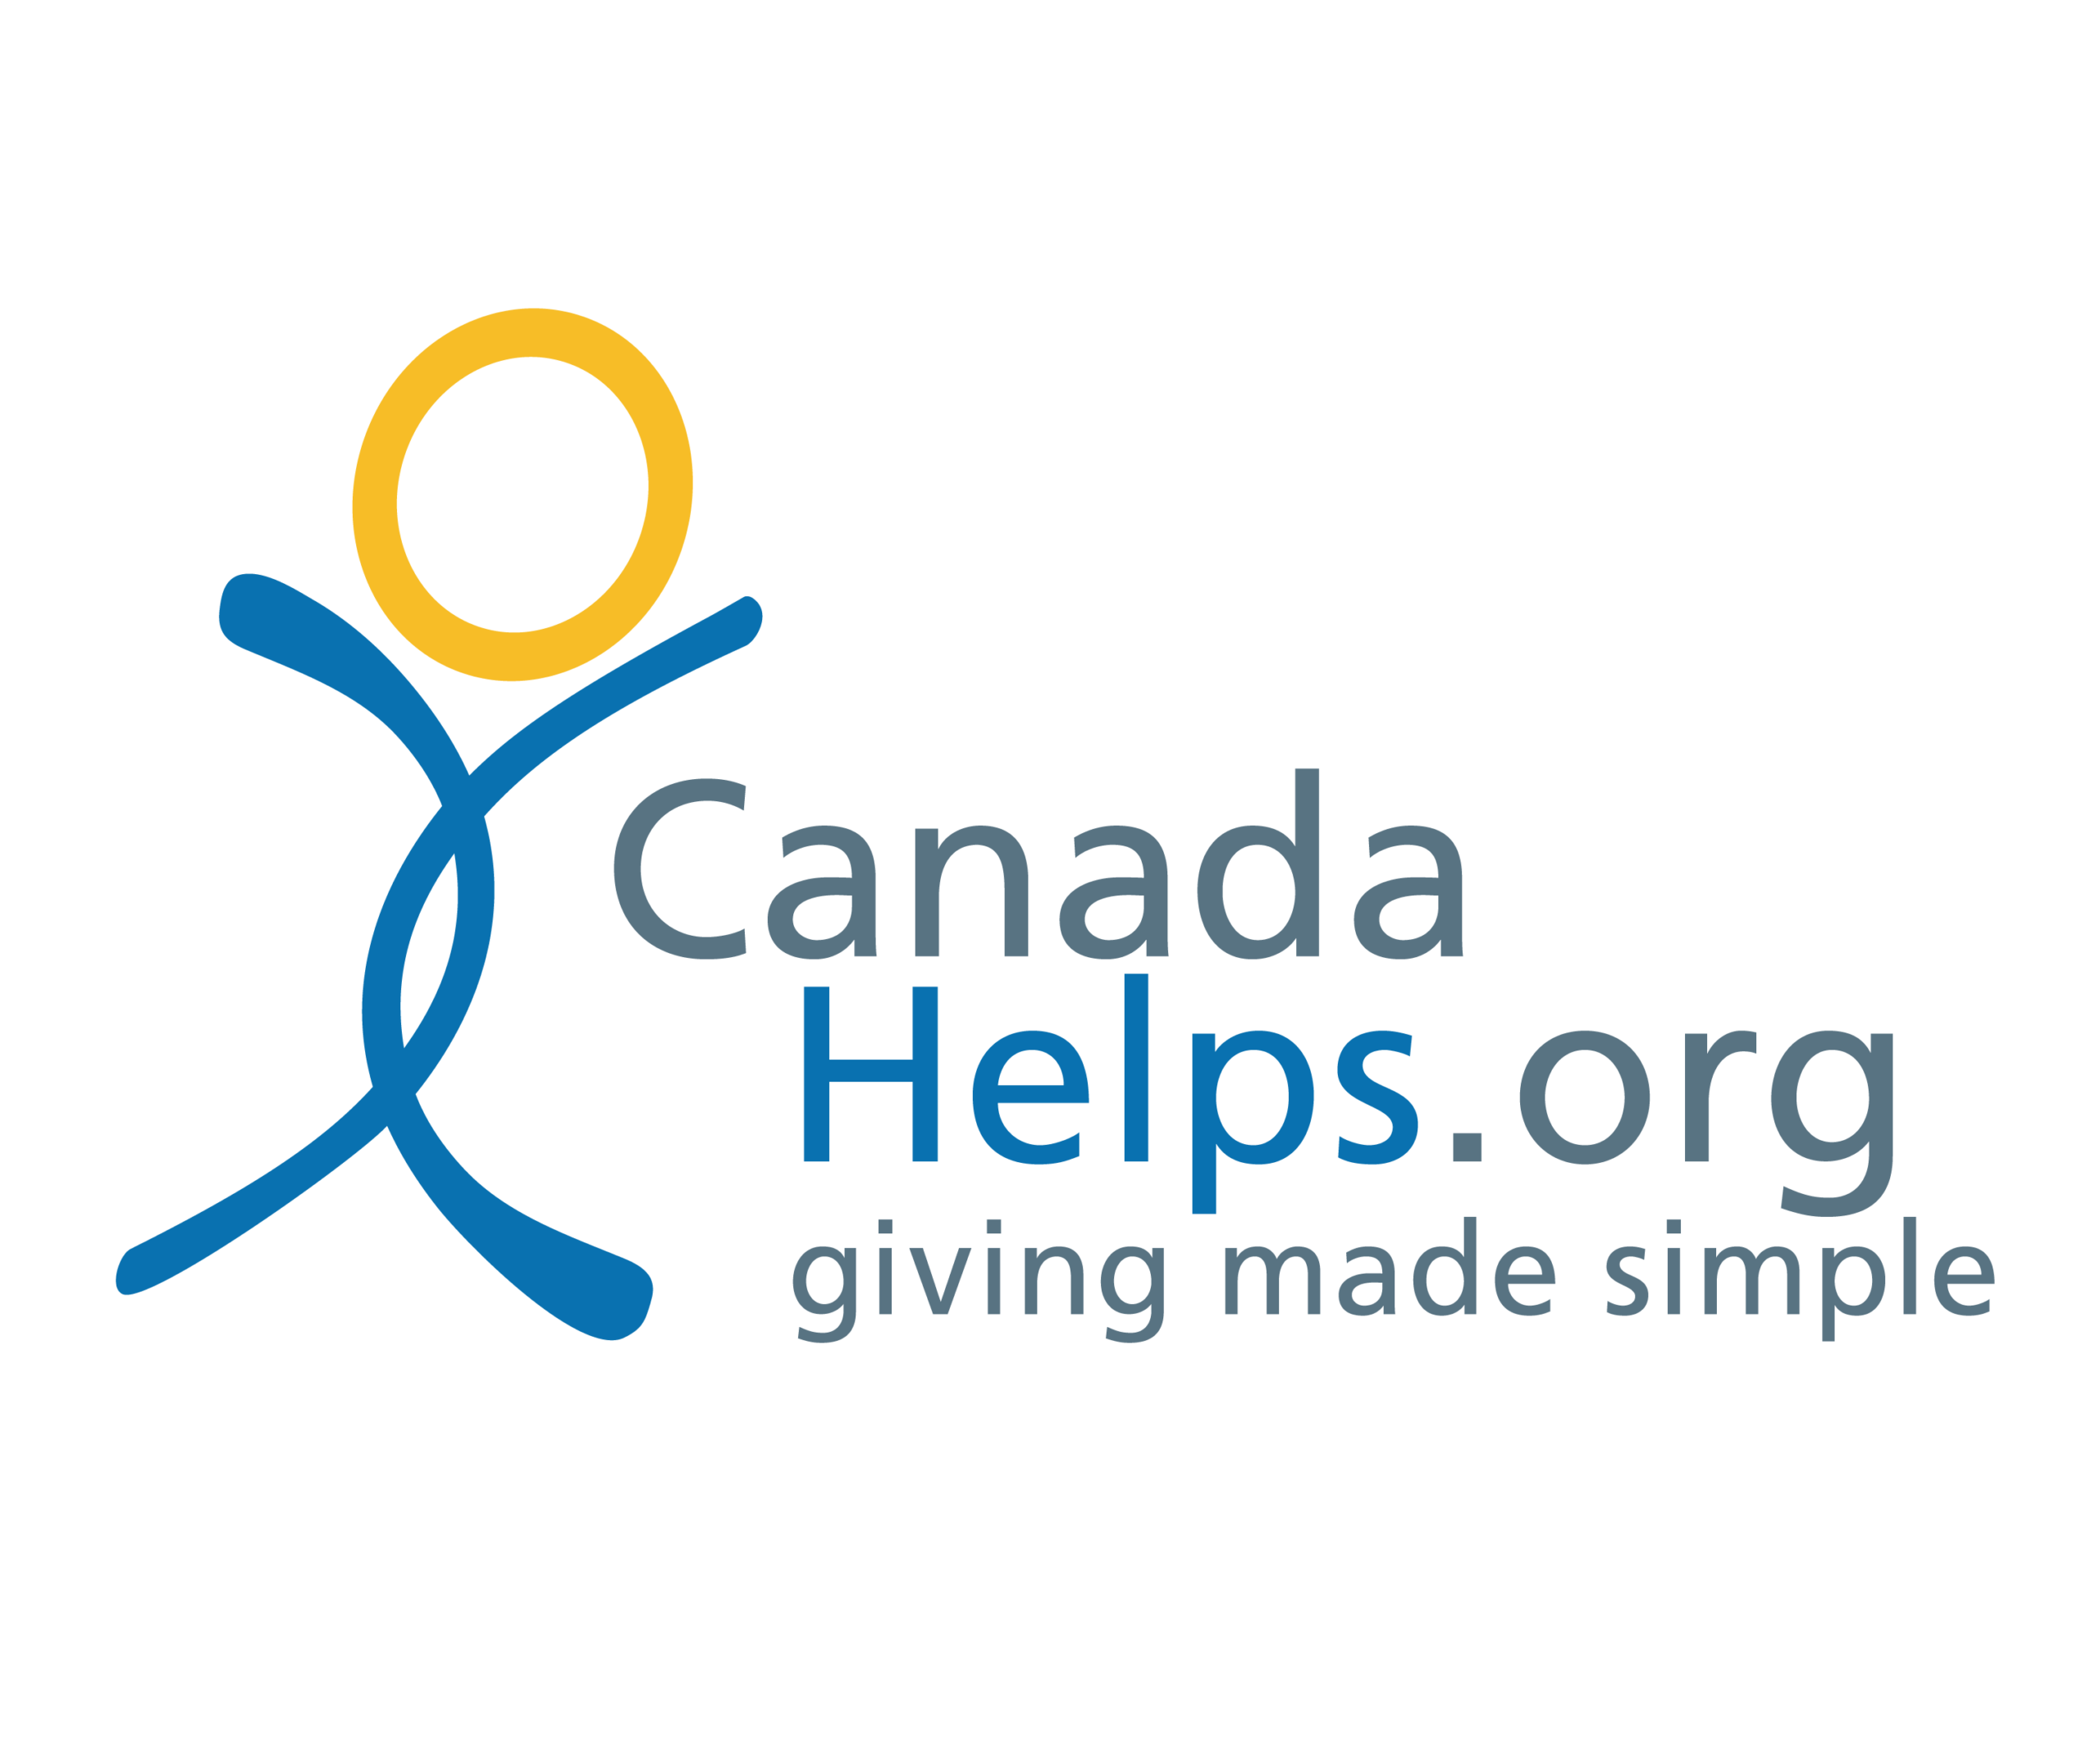 canadahelps.org